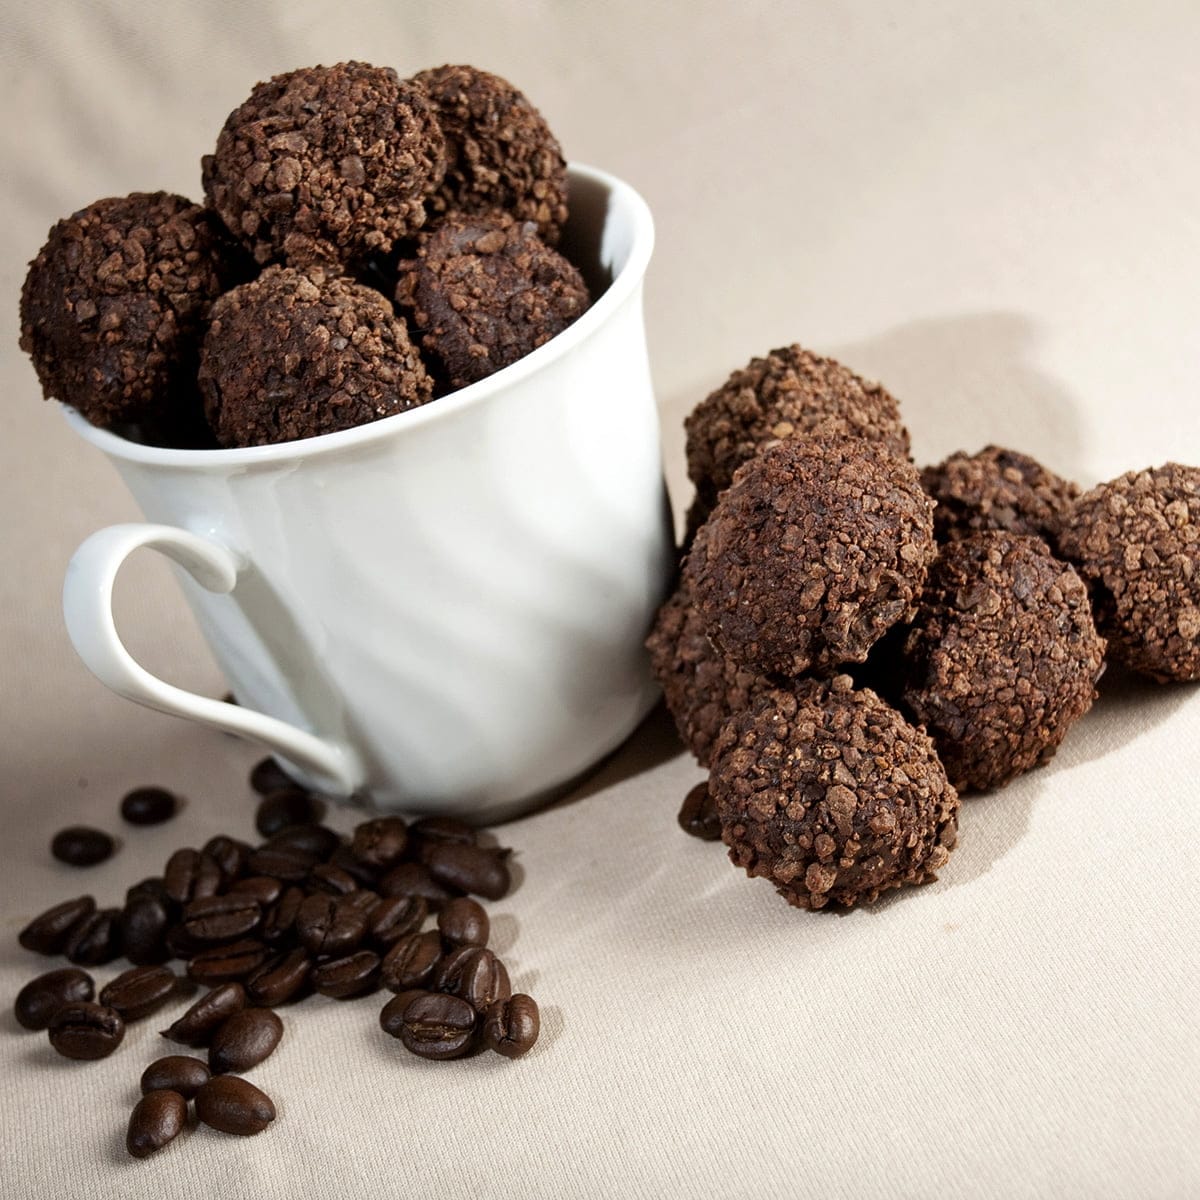 Dark chocolate truffles - coated in smashed coffee beans - fill a white coffee mug. There are stray dark chocolate coffee truffles and coffee beans at the base of the mug.